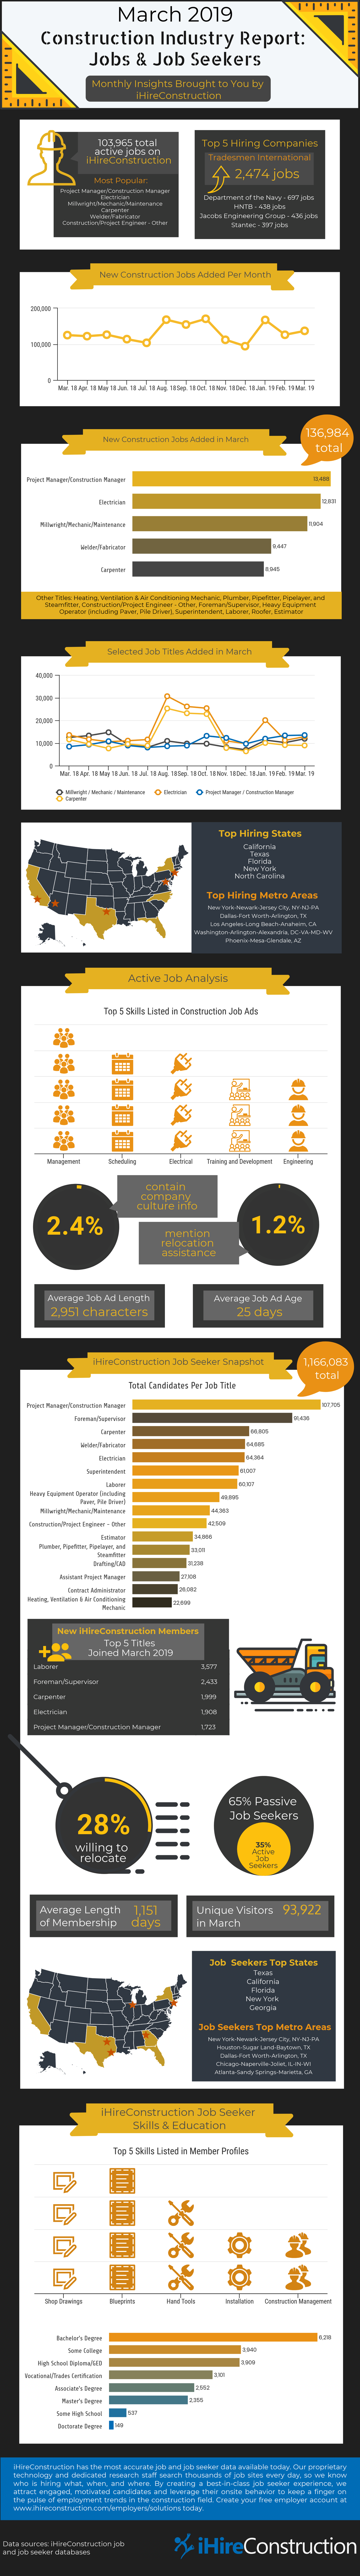 iHireConstruction's March 2019 industry report on construction jobs and job seekers. Infographic.